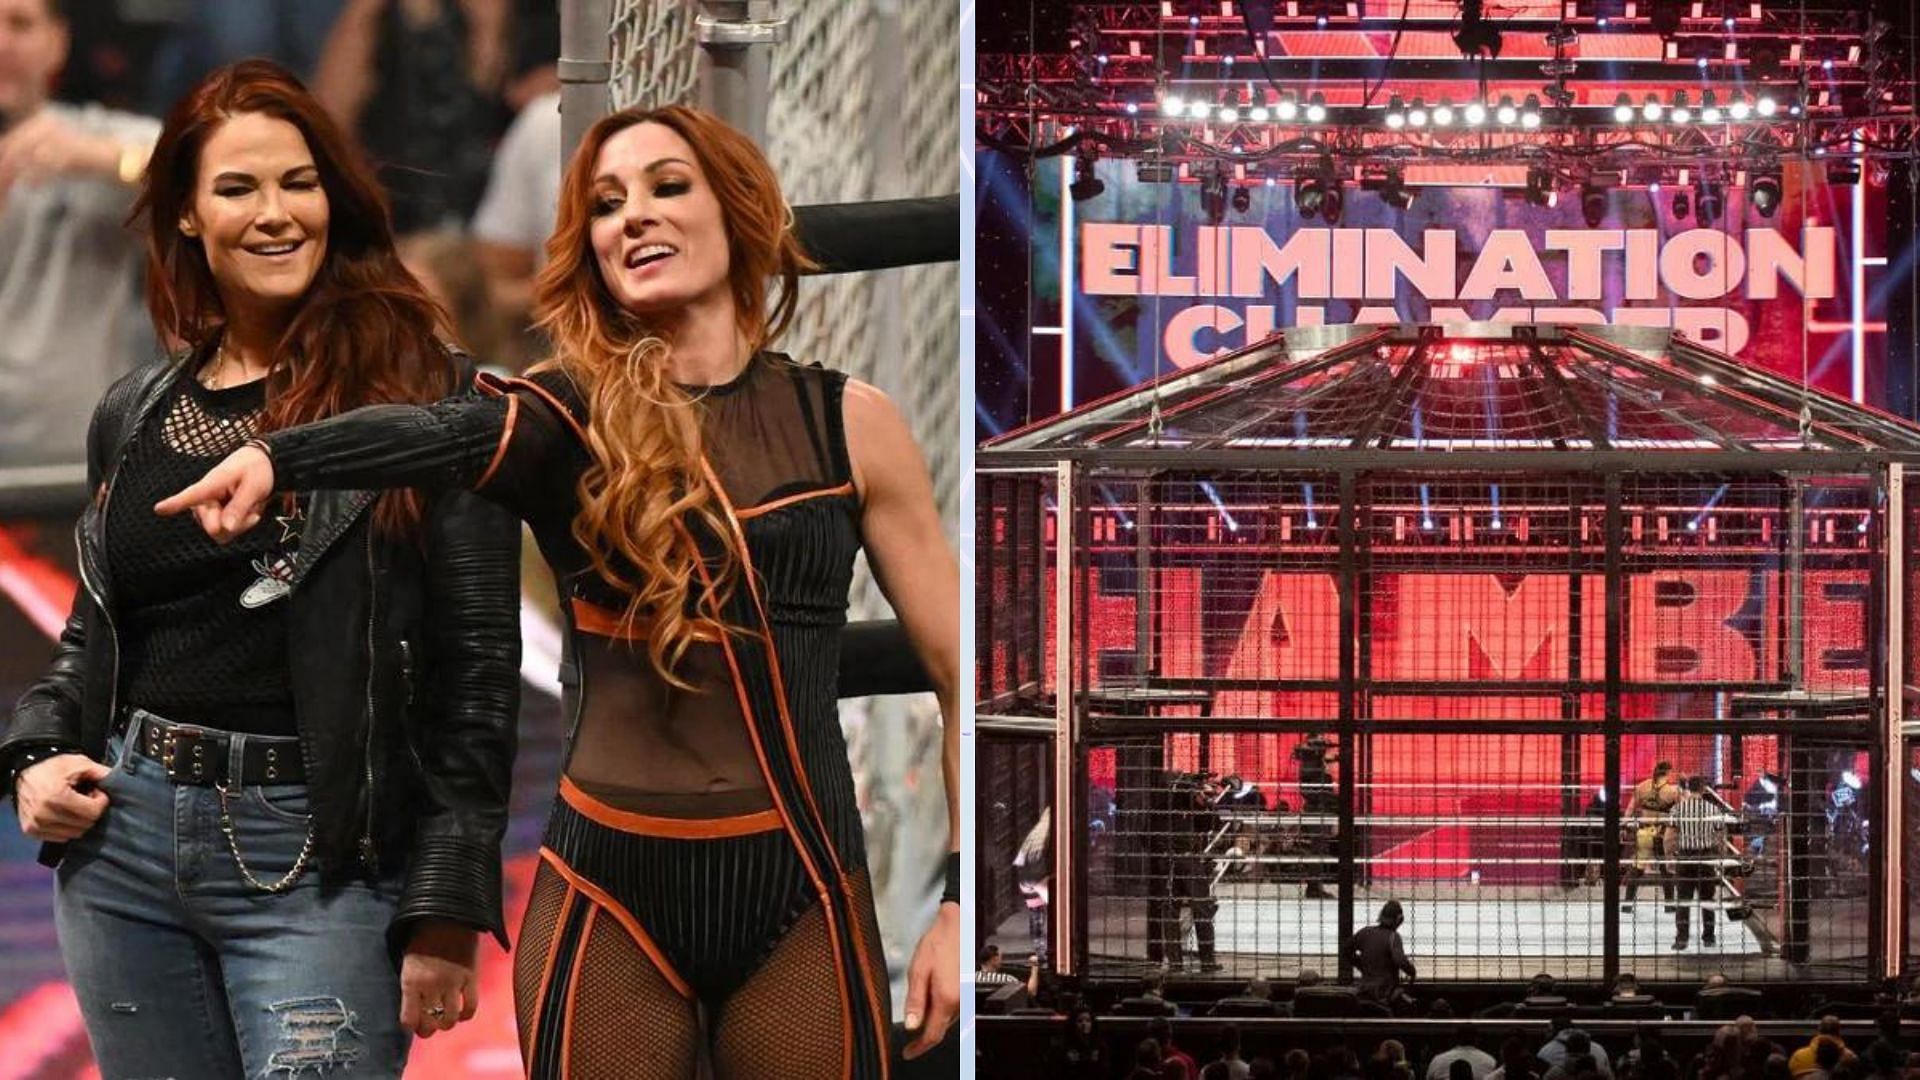 Lita surprisingly appeared and helped Becky Lynch on WWE RAW